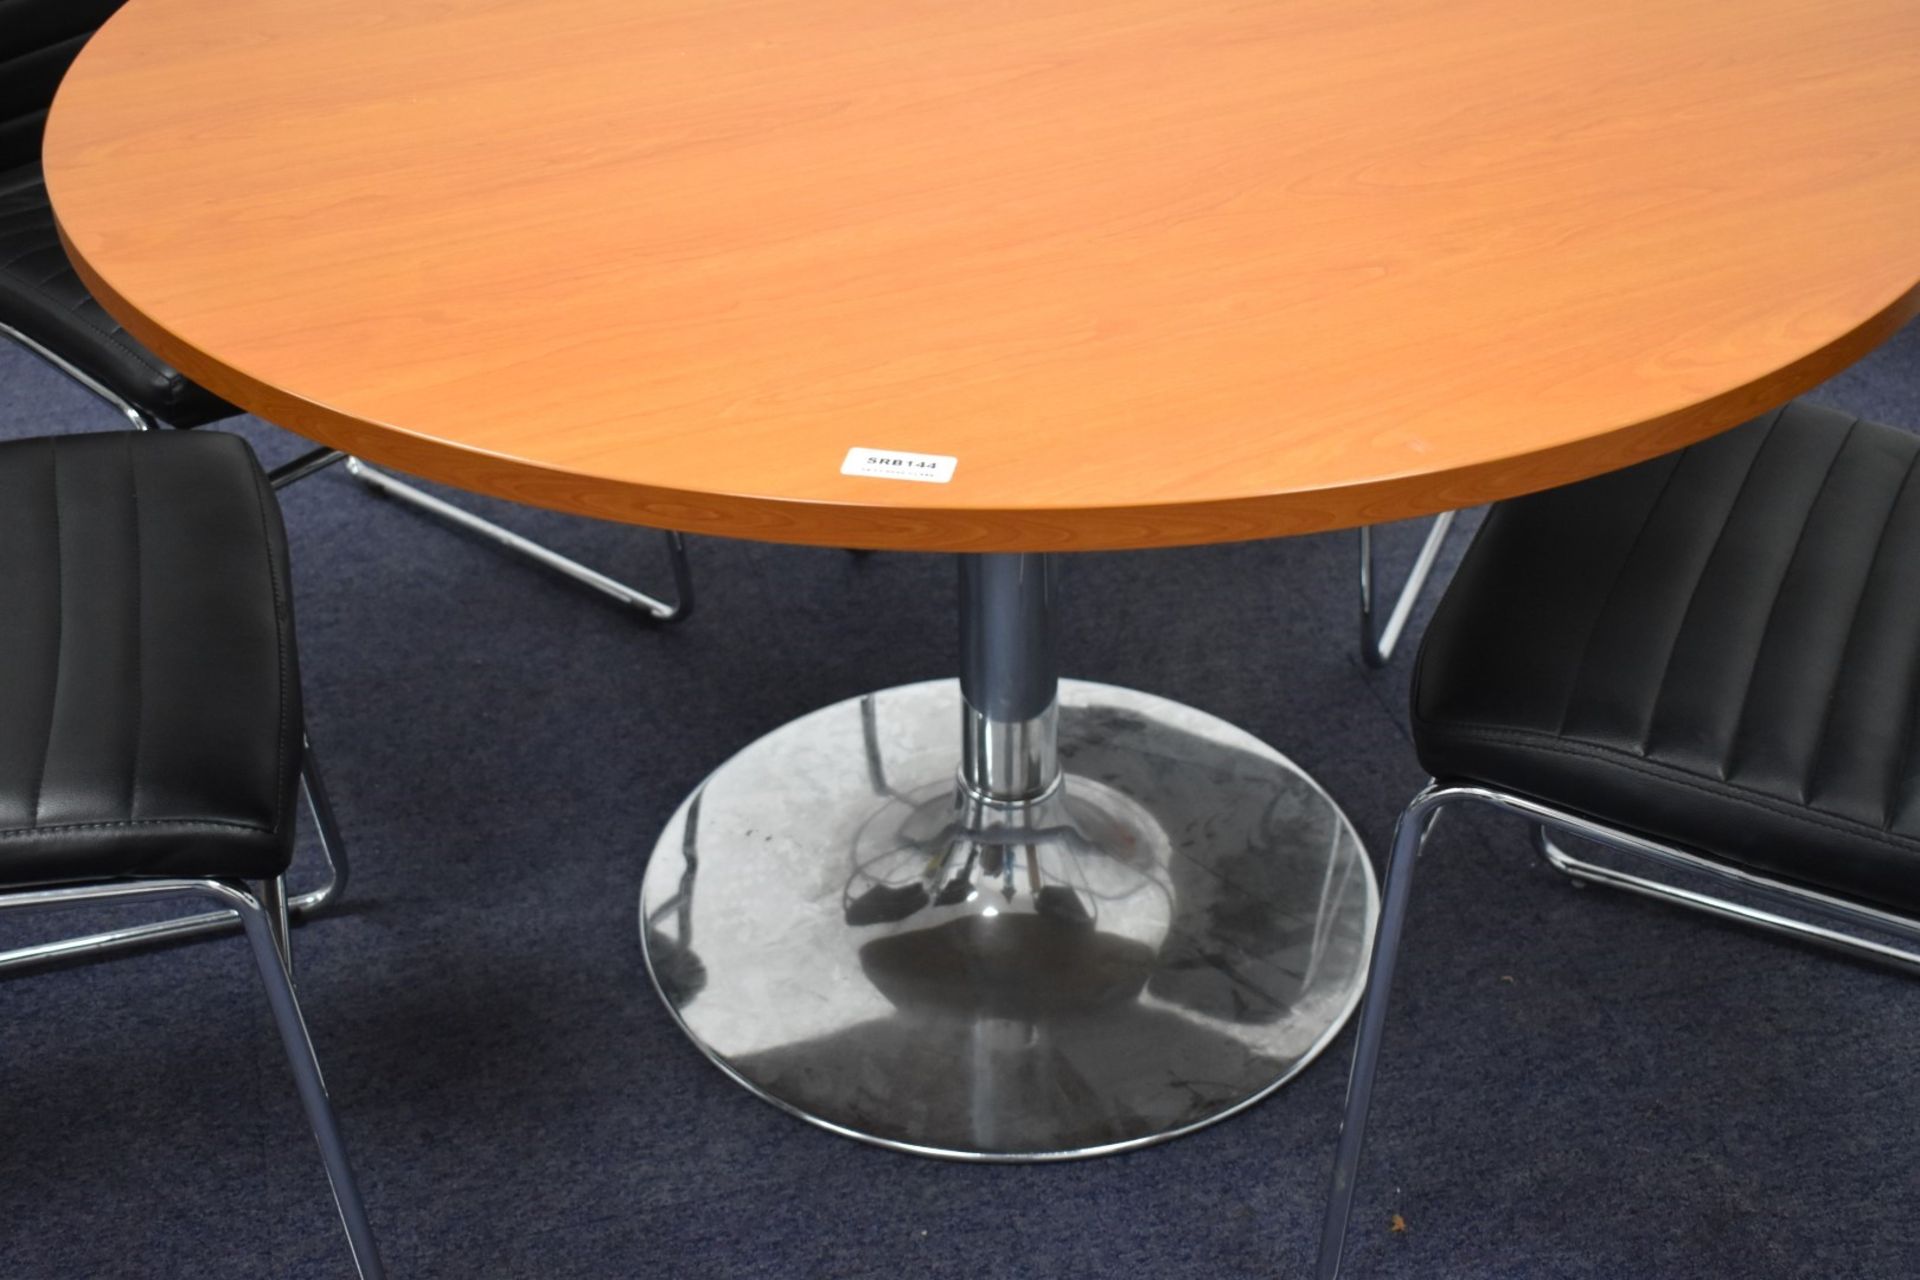 1 x Cherry Wood Office Meeting Table With Chrome Base and Four Black Faux Leather Office Chairs - Image 5 of 6